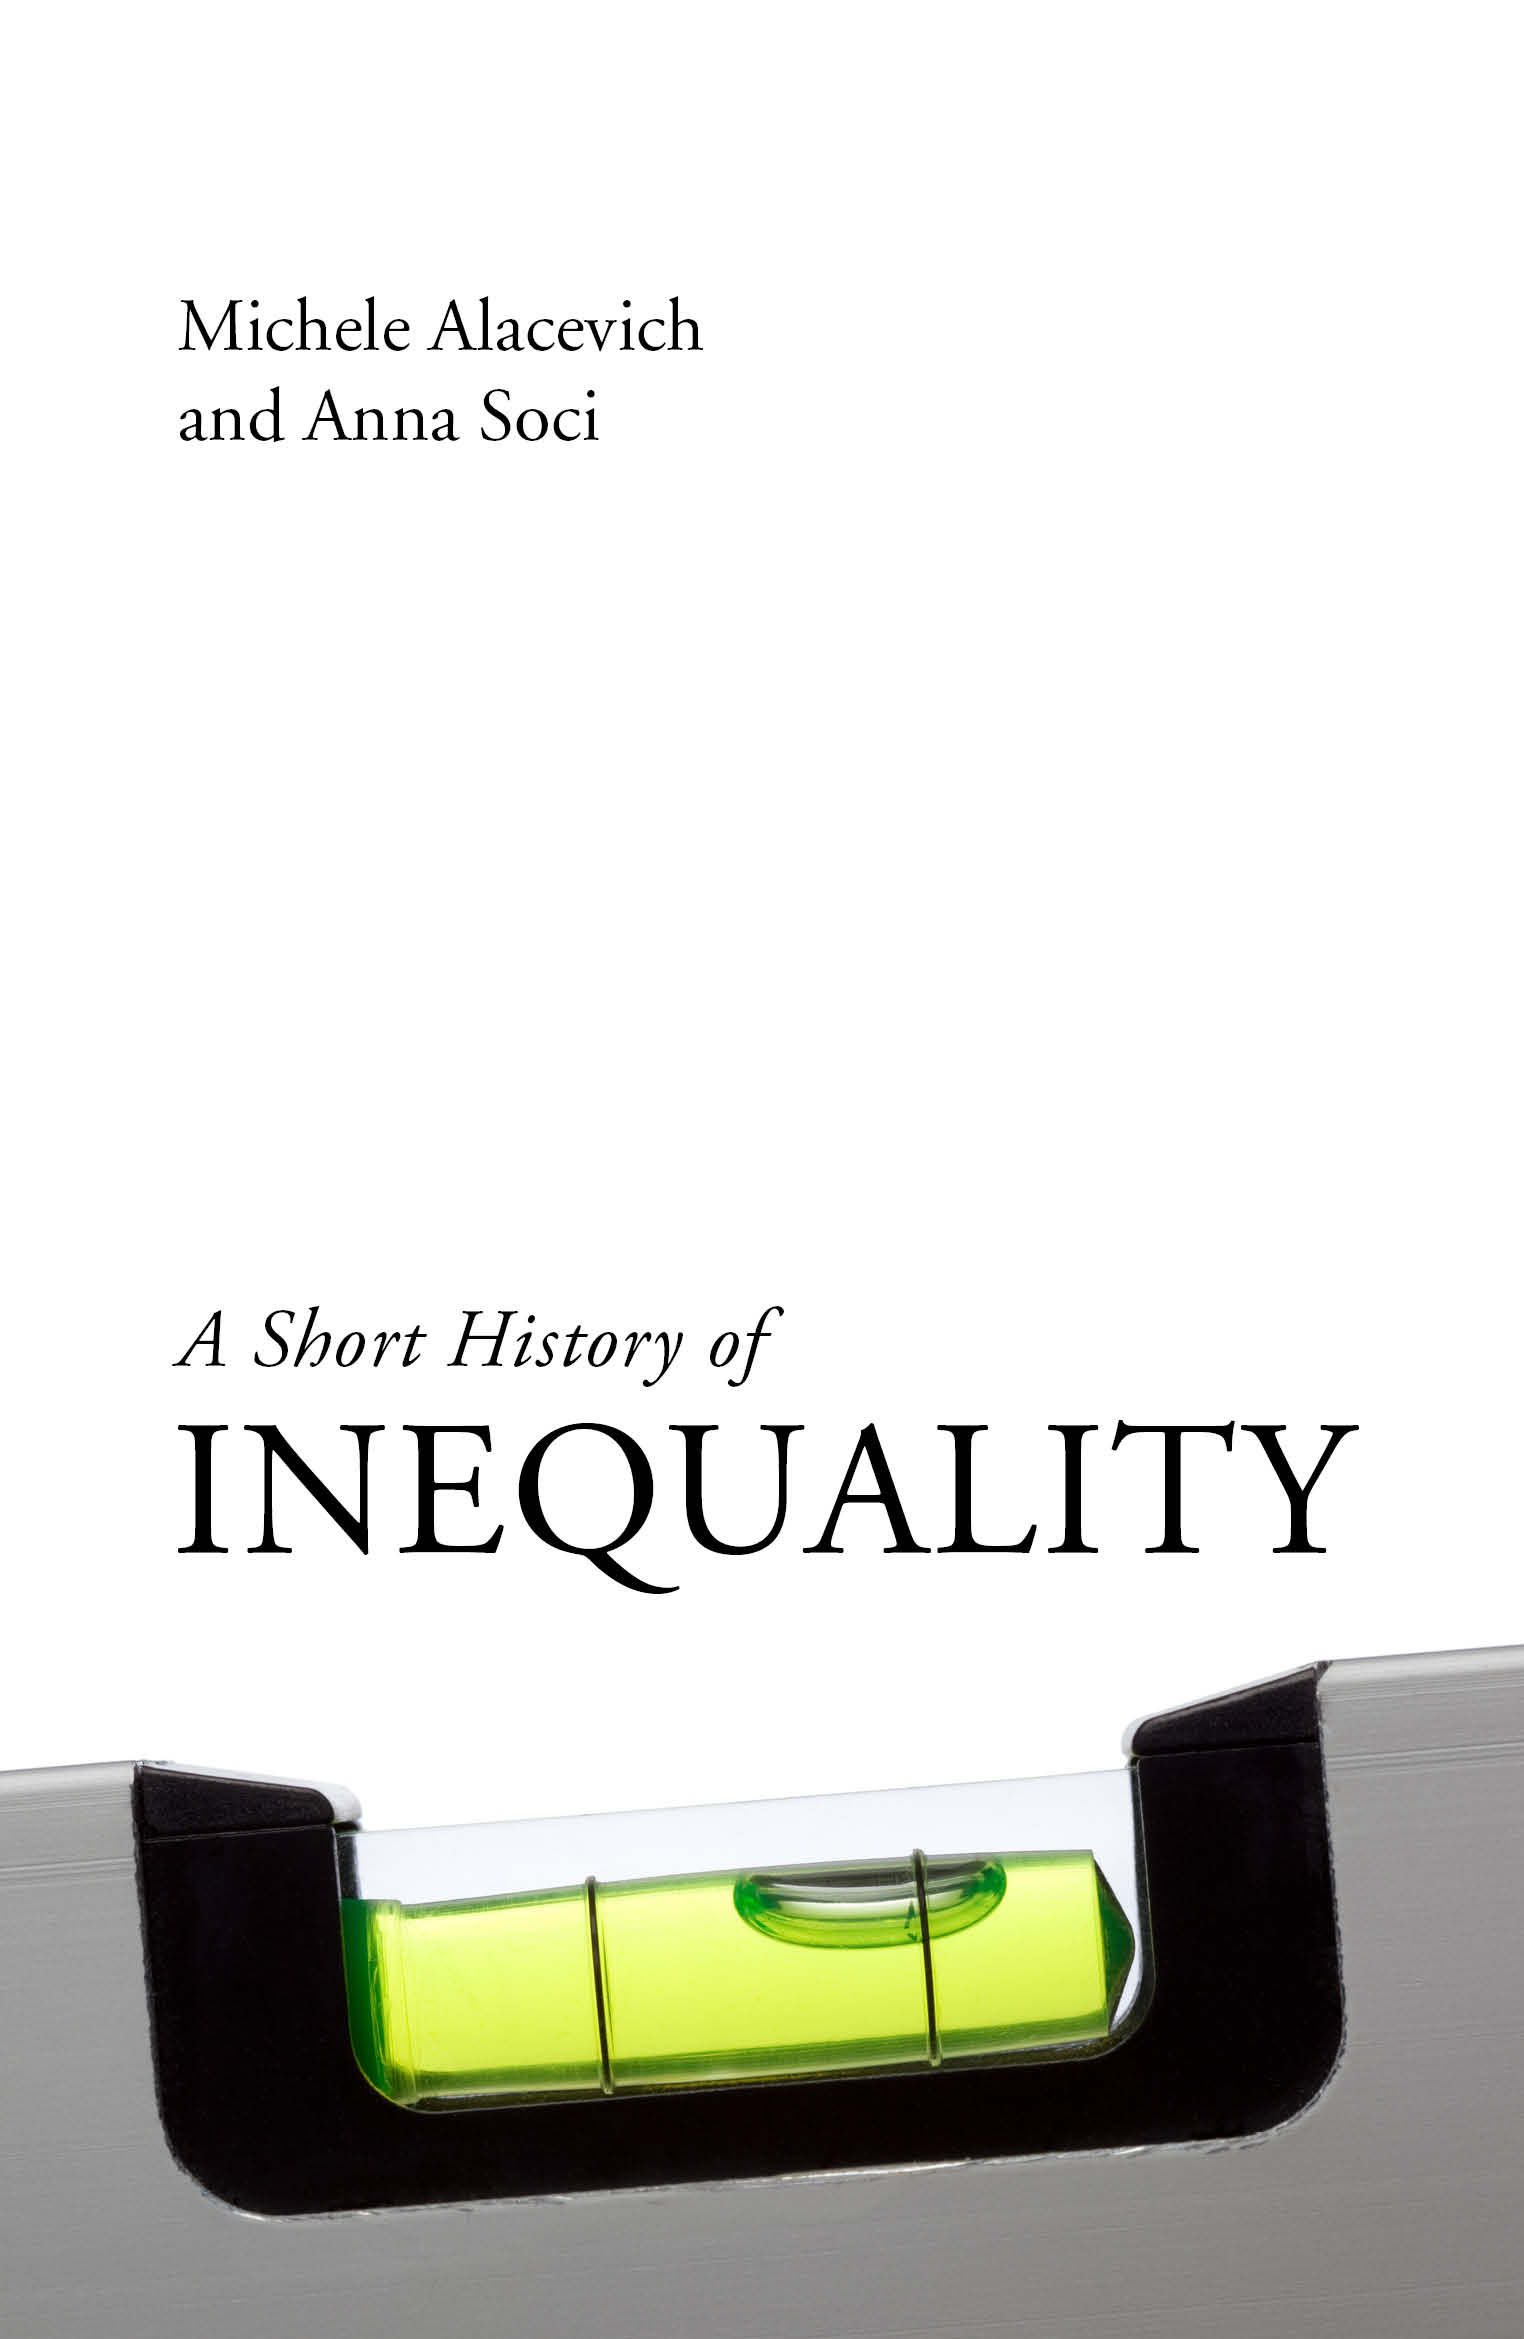 A Short History of Inequality | Michele Alacevich, Anna Soci